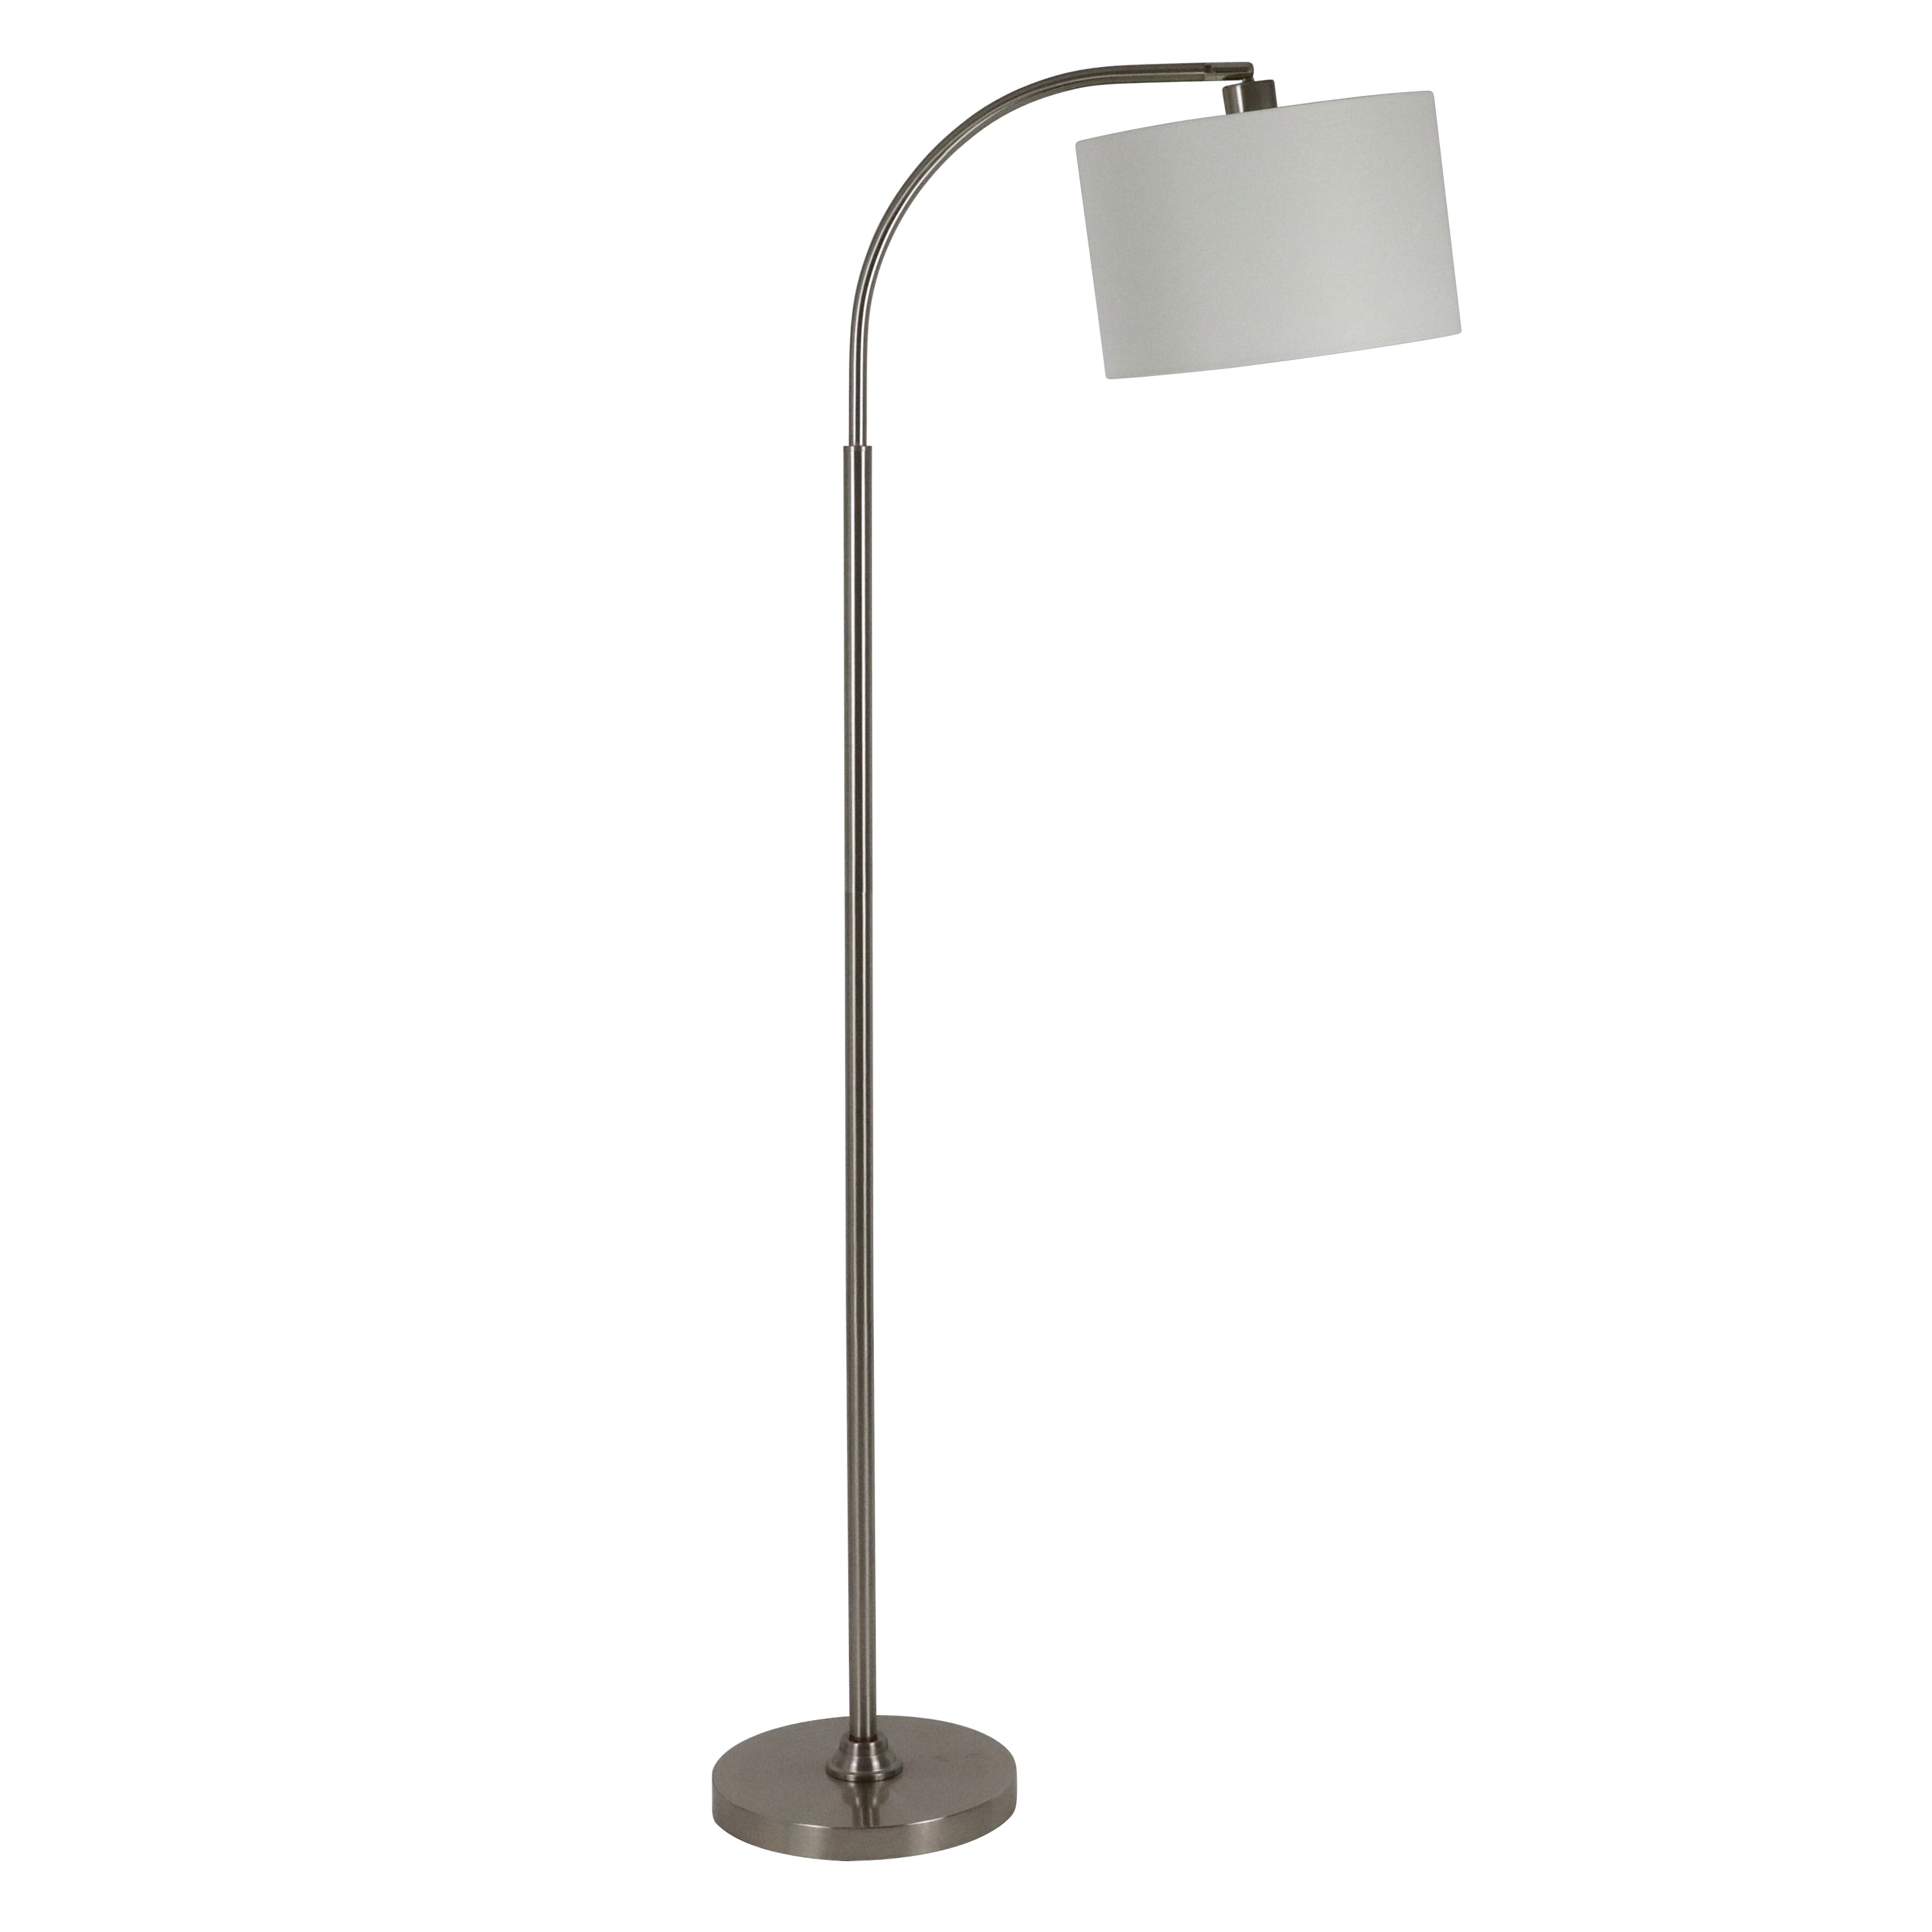 60″ Asher Arc Floor Lamp with Brushed Steel Finish